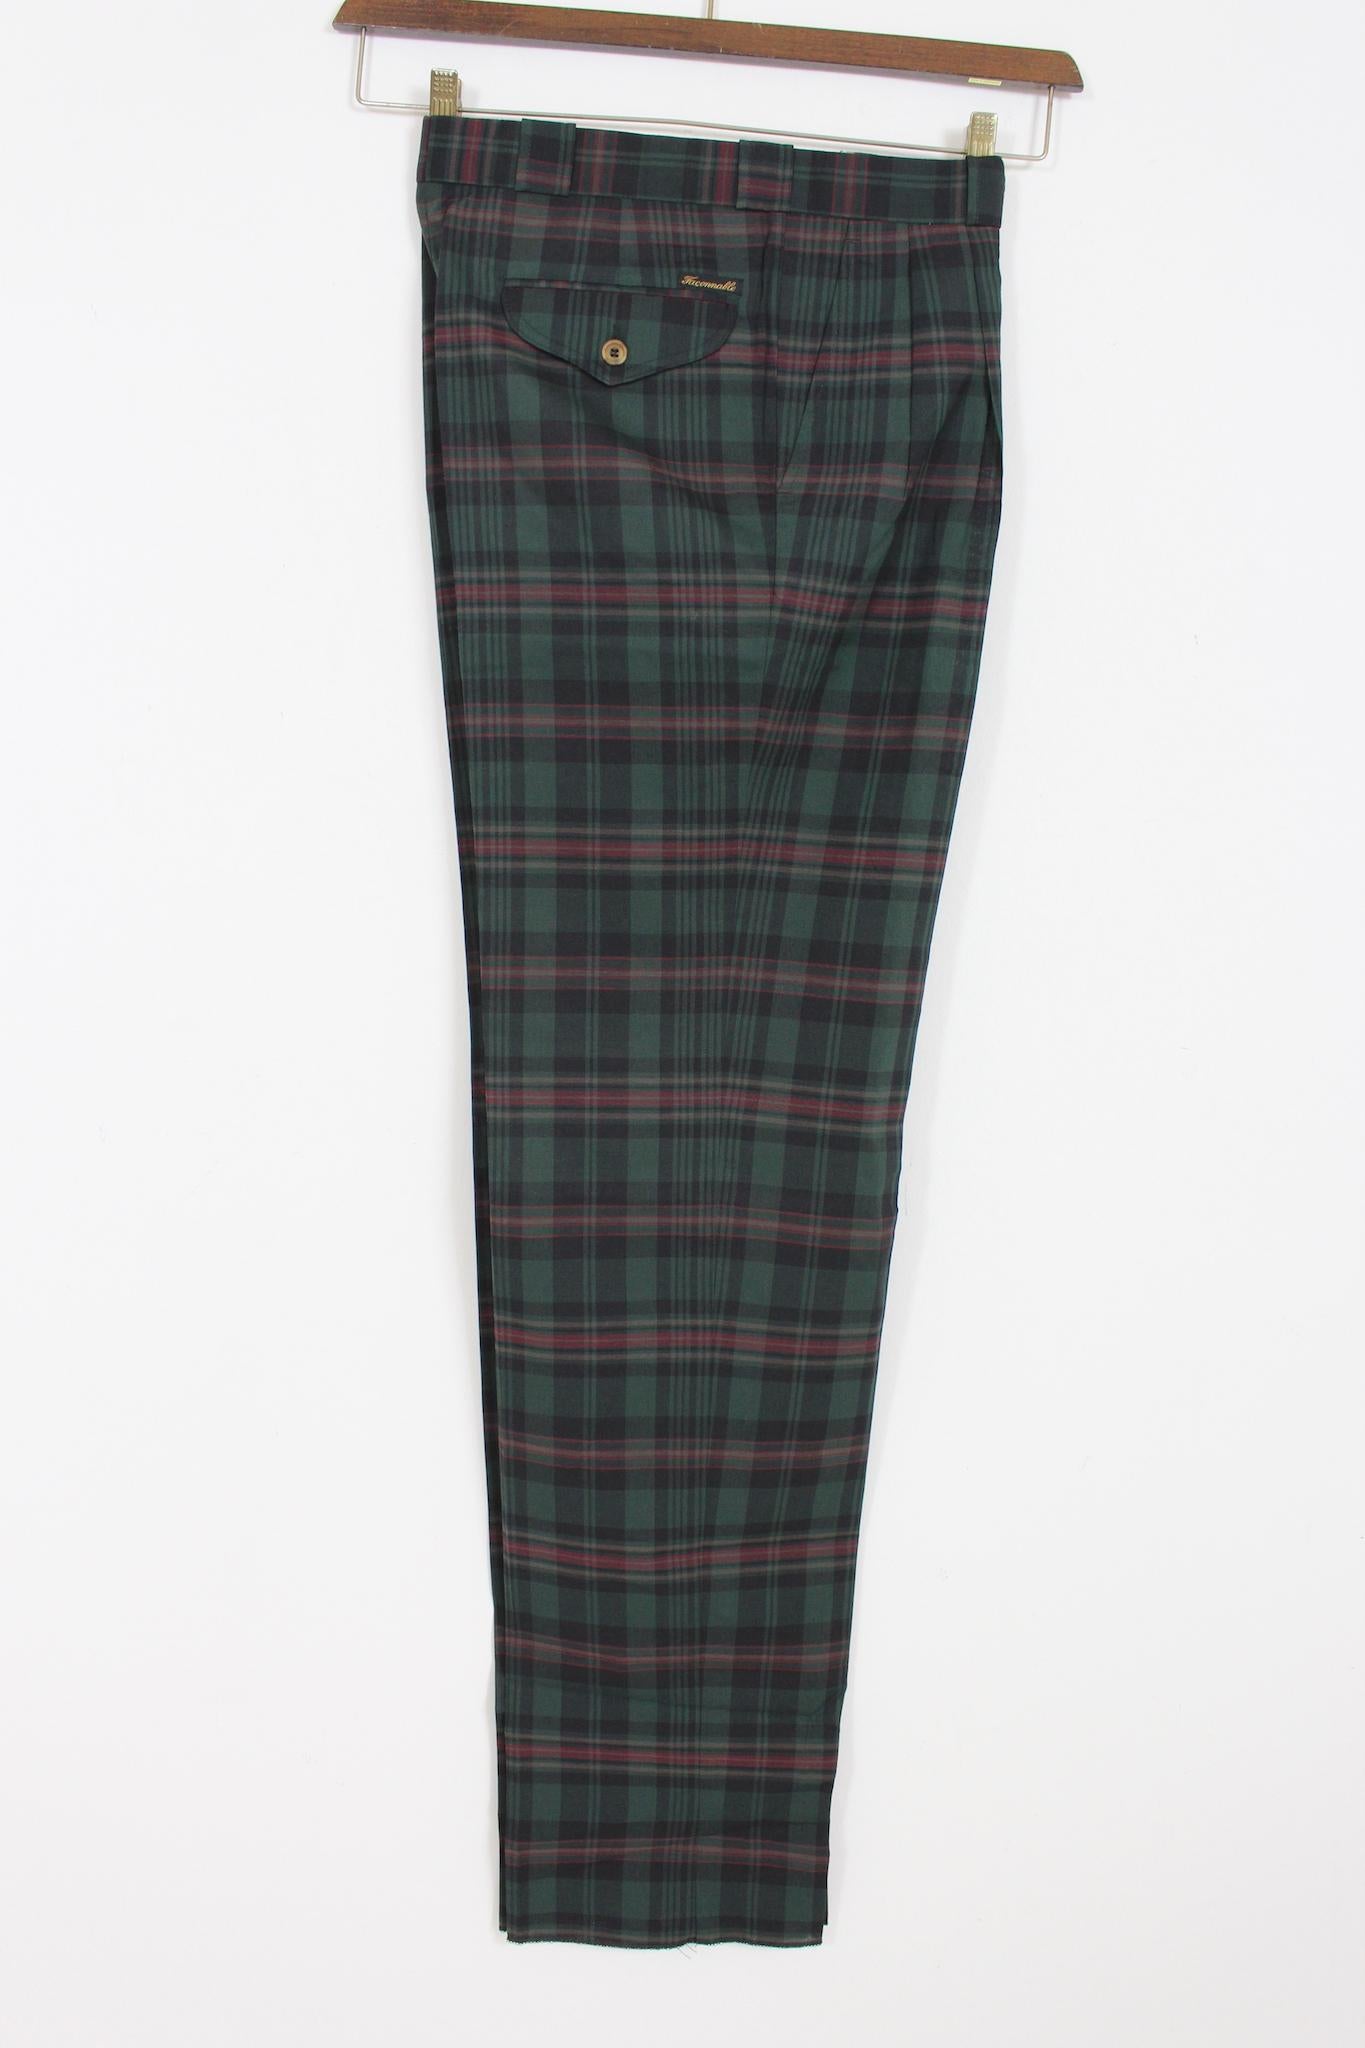 Facconable 90s vintage checked trousers. Green and red color, 33% cotton, 67% polyester fabric. Made in italy. Coming from stock fund.

Size: 42 It 32 Us 32 Uk

Waist: 40 cm
Length: 116 cm
Hem: 23 cm
Pant inseam: 87cm